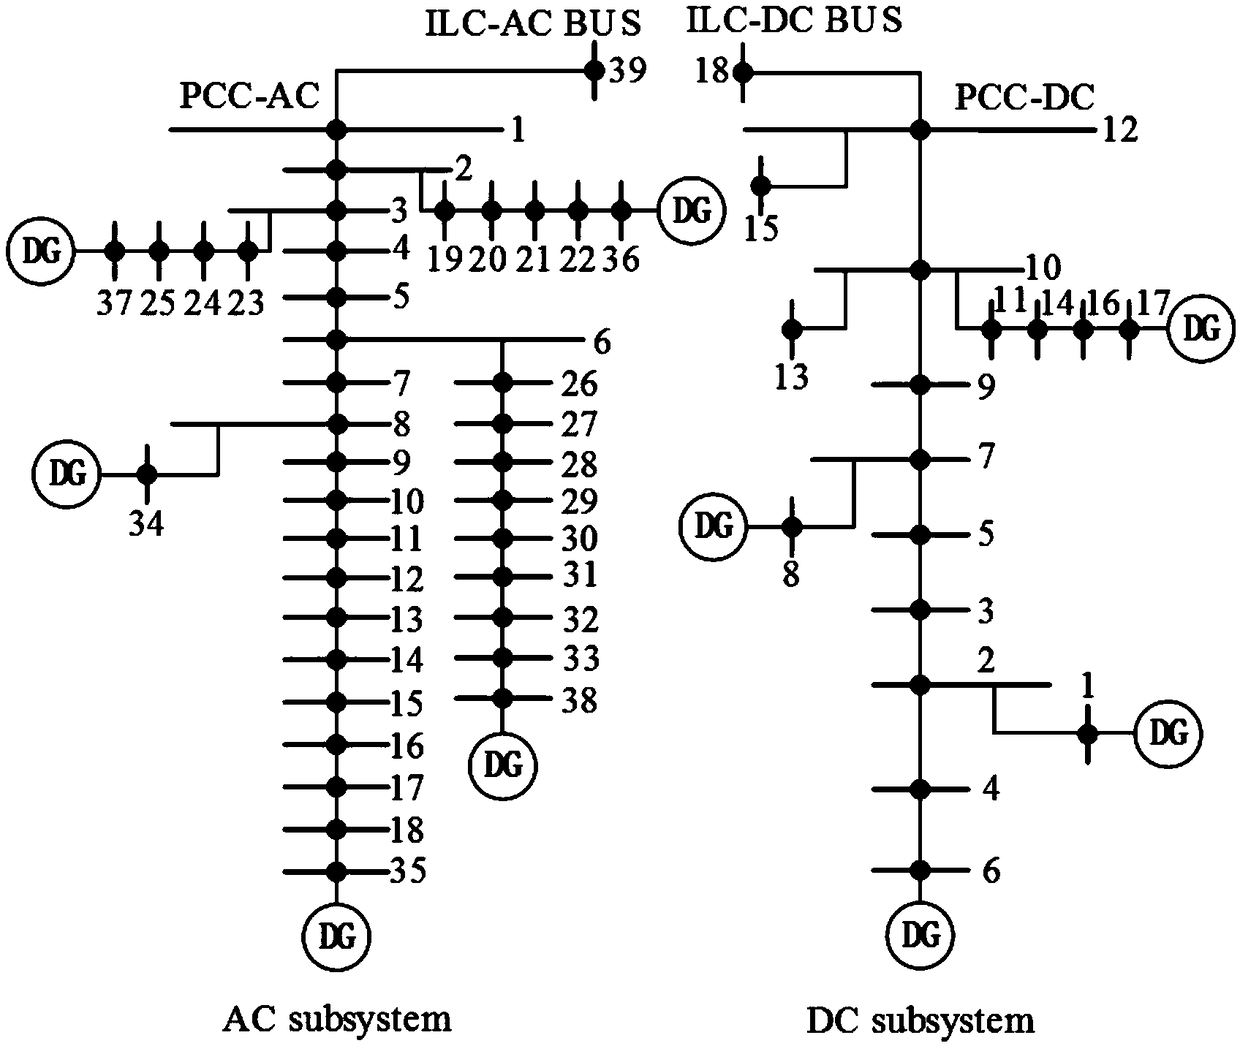 Improved adaptive droop control-based island alternating current-direct current hybrid microgrid power flow calculation method